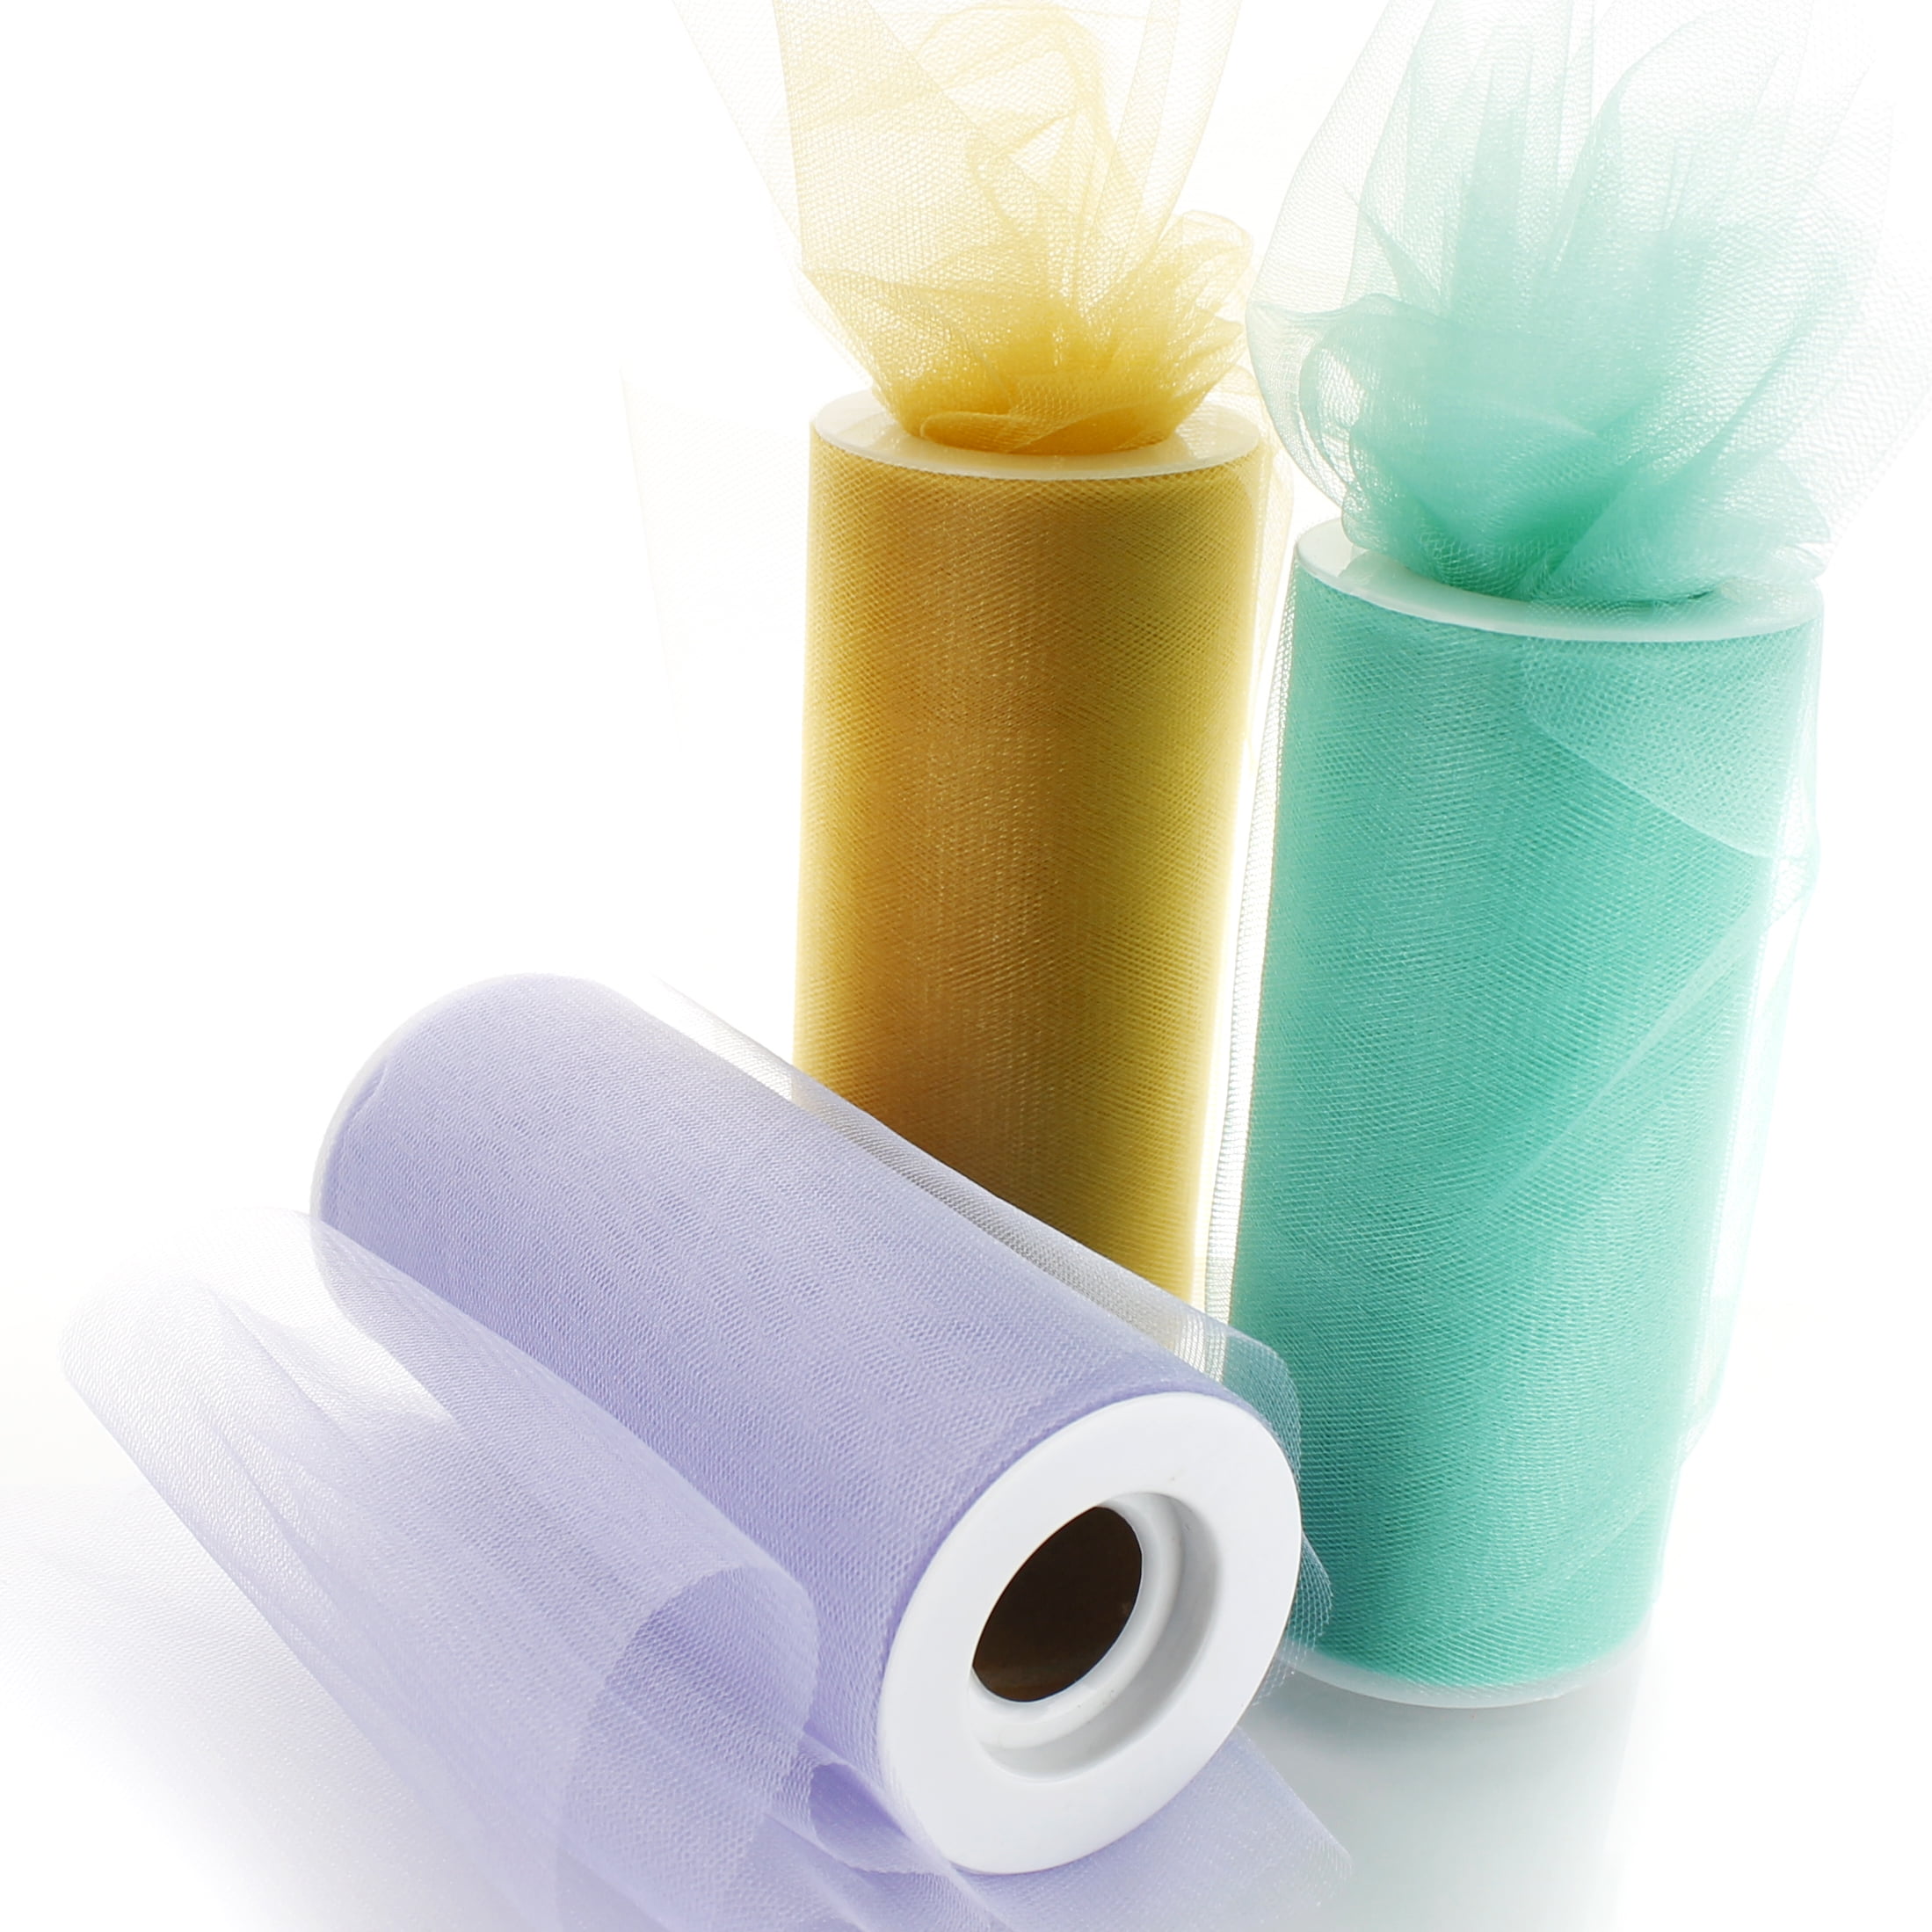 Glassine Paper Roll for Artwork, Crafts, and Baked Goods (36 Inches x 25 Yards)